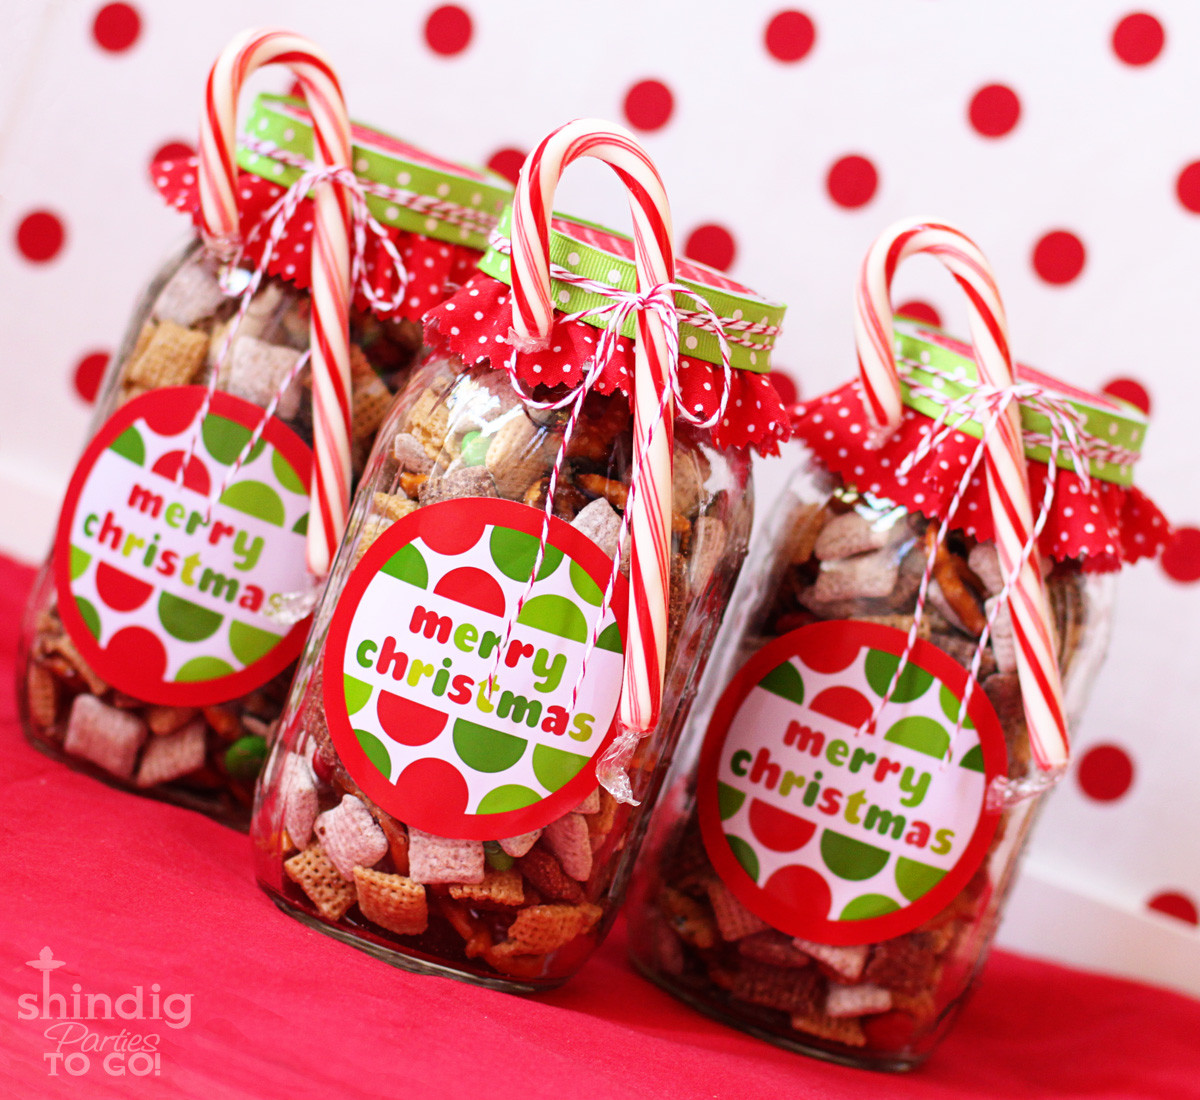 Homemade Gift Ideas For Christmas
 How To Make Handmade Chex Mix Holiday Gifts & Bonus Free